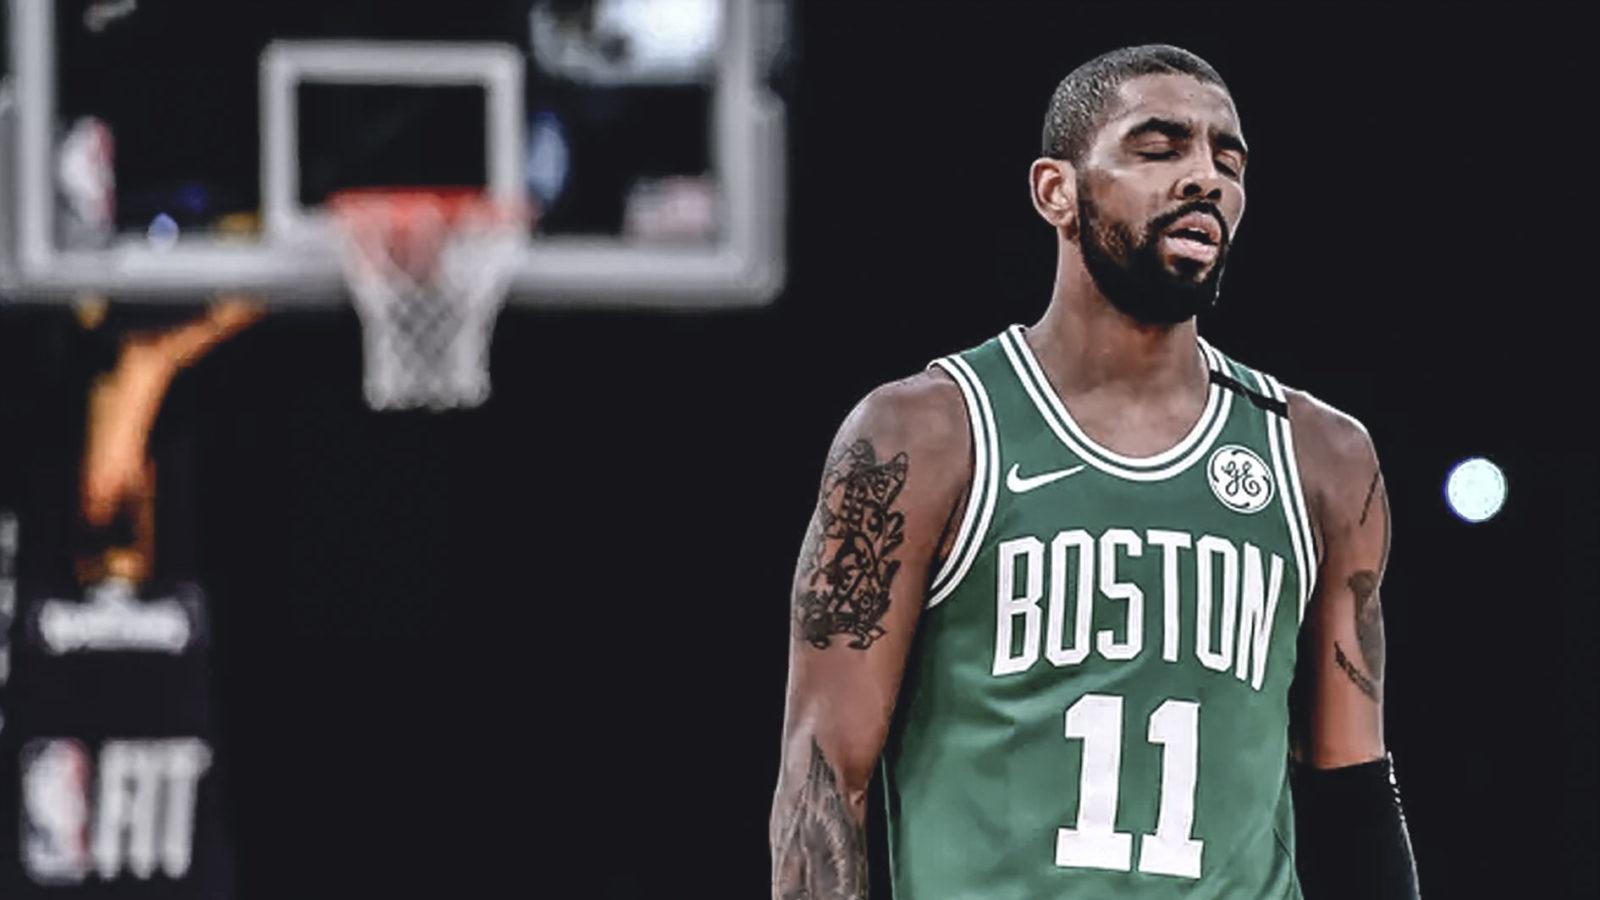 Kyrie Irving clashes with the media (again) Sports Daily